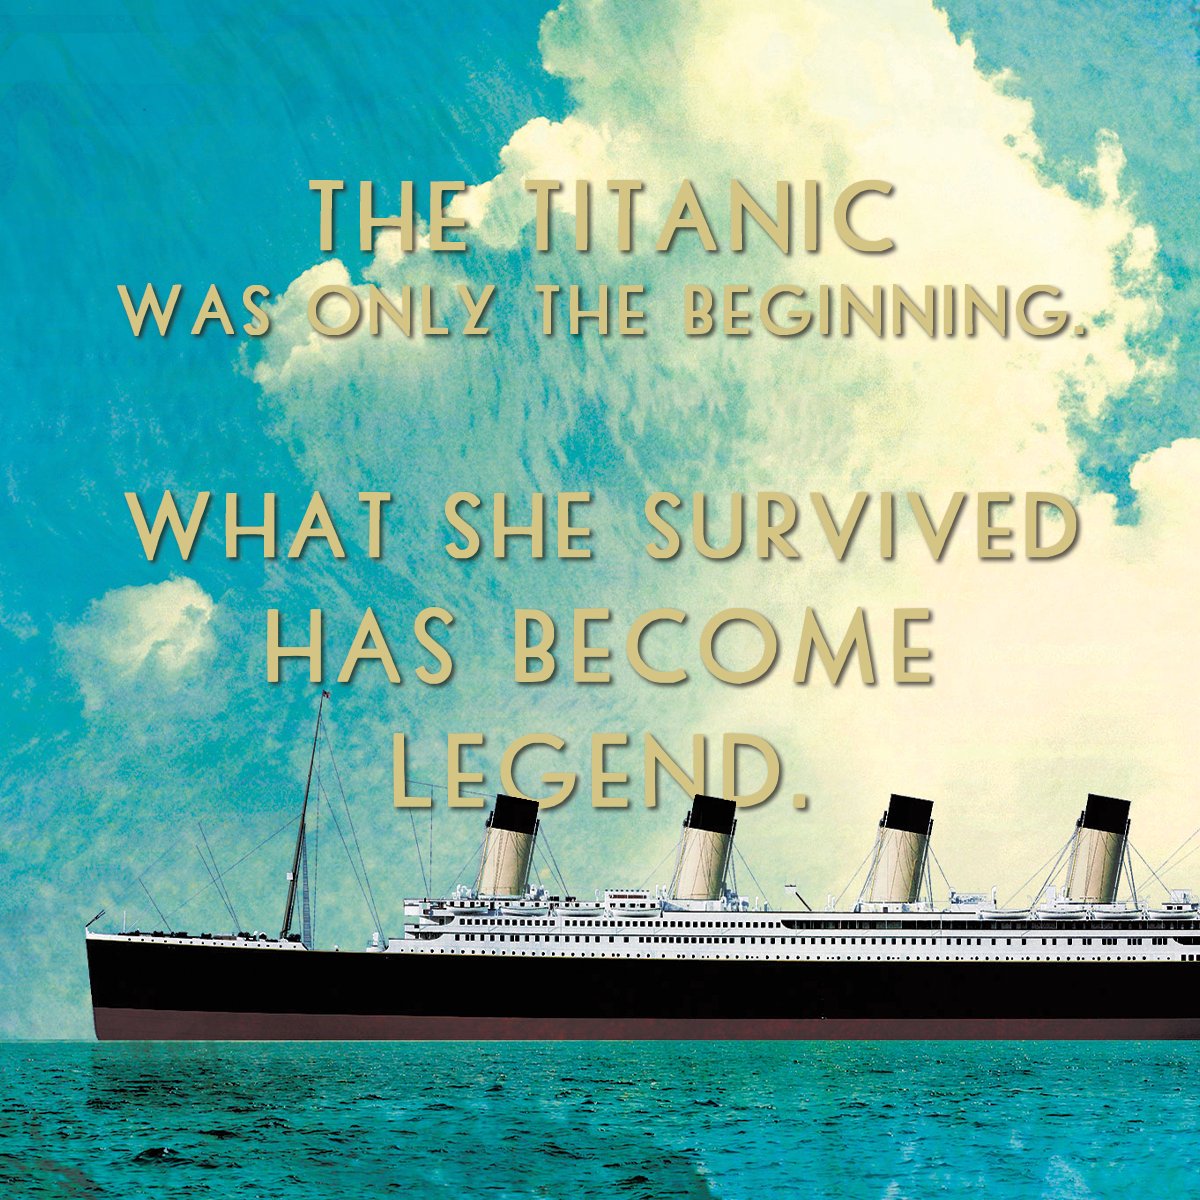 Pre-order for the newest book from author Jenni L Walsh, “Unsinkable,” inspired by the true stories of Violet Jessop and the thirty-nine women of the Special Operations Executive. Two unsinkable women. Two stories of survival, family and finding one’s happiness.